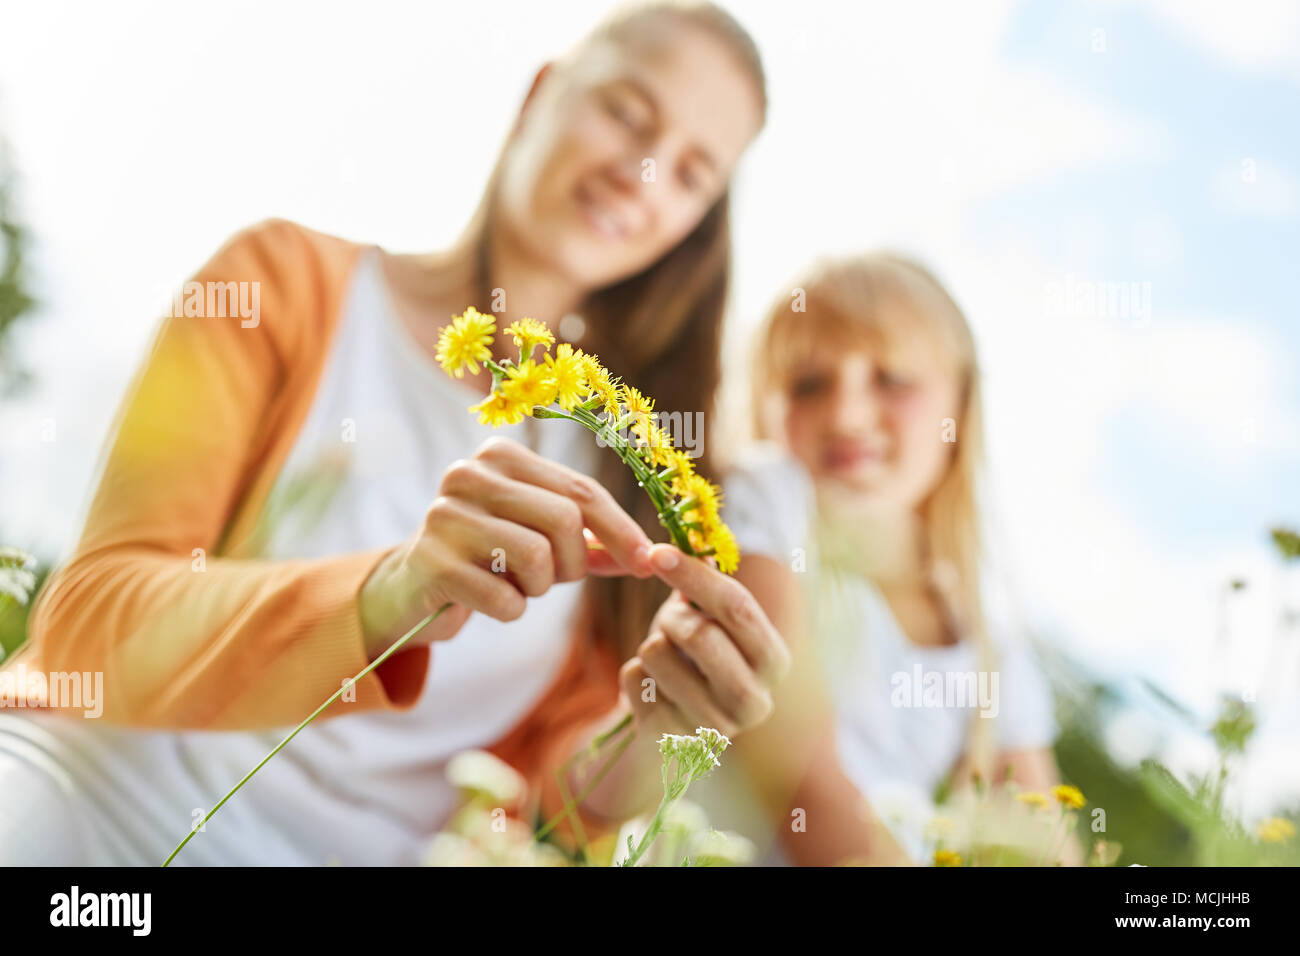 Woman binds a flower wreath in spring from dandelion flowers Stock Photo